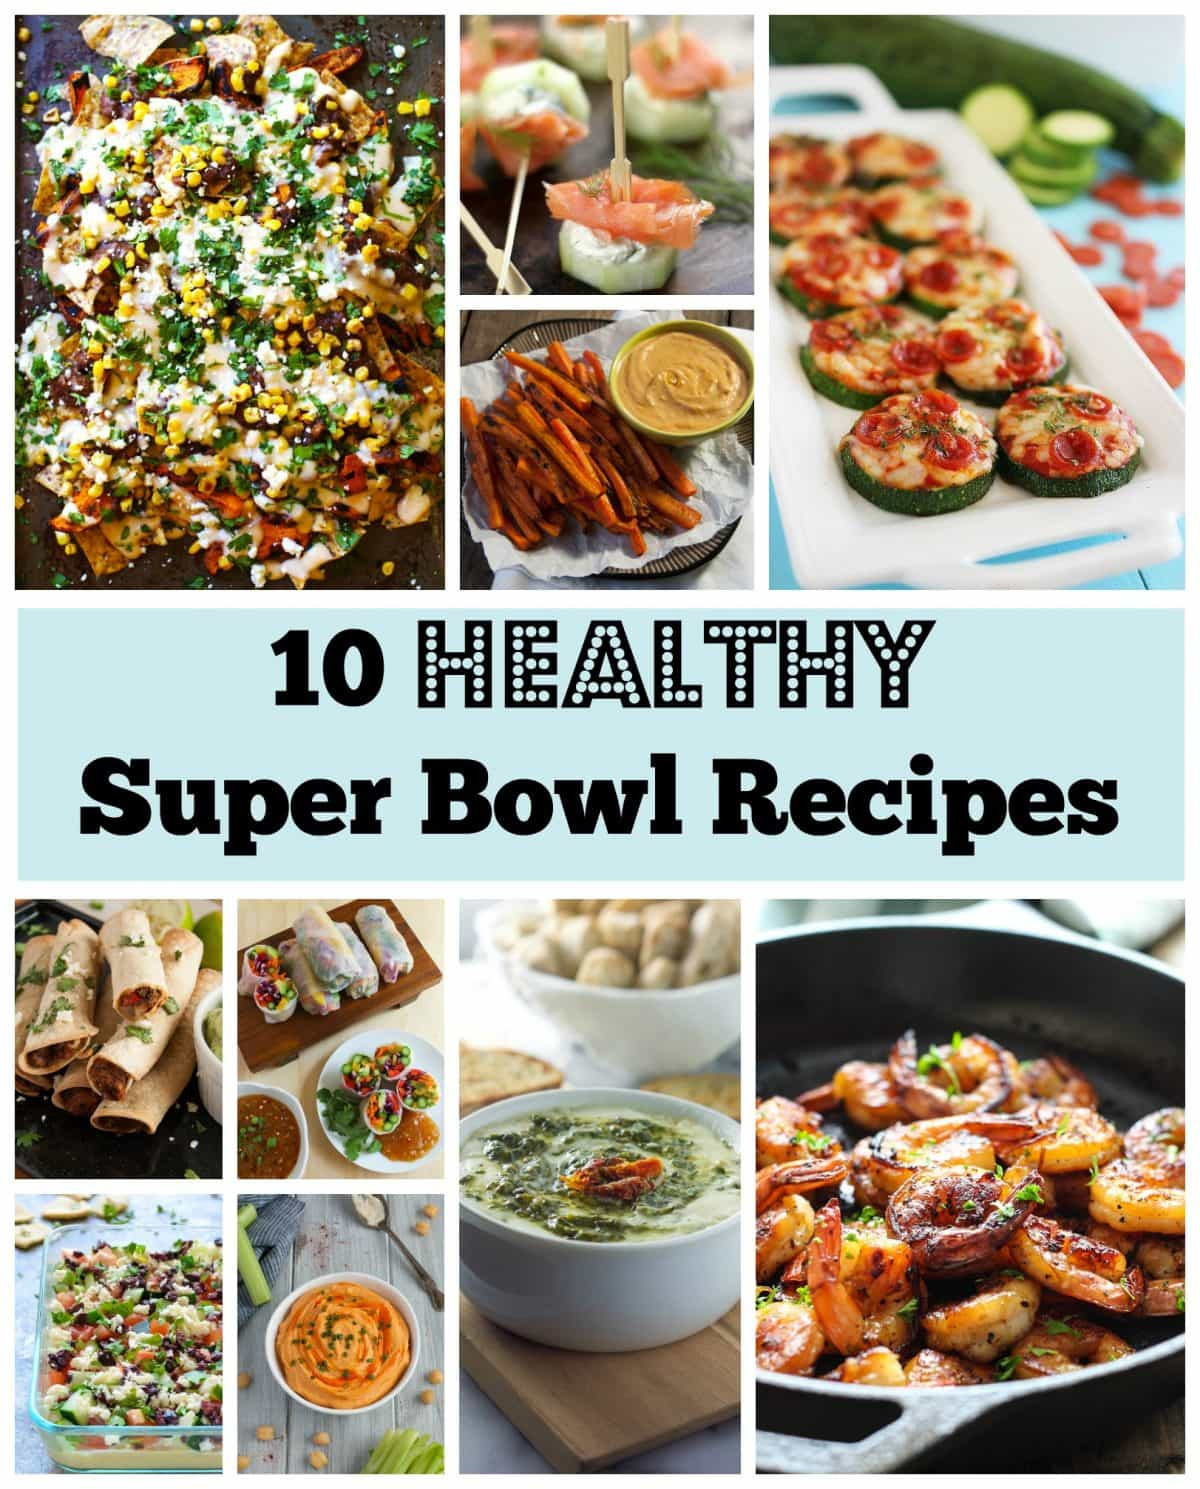 Recipes For Super Bowl Sunday
 Healthy Super Bowl Recipes Feasting not Fasting